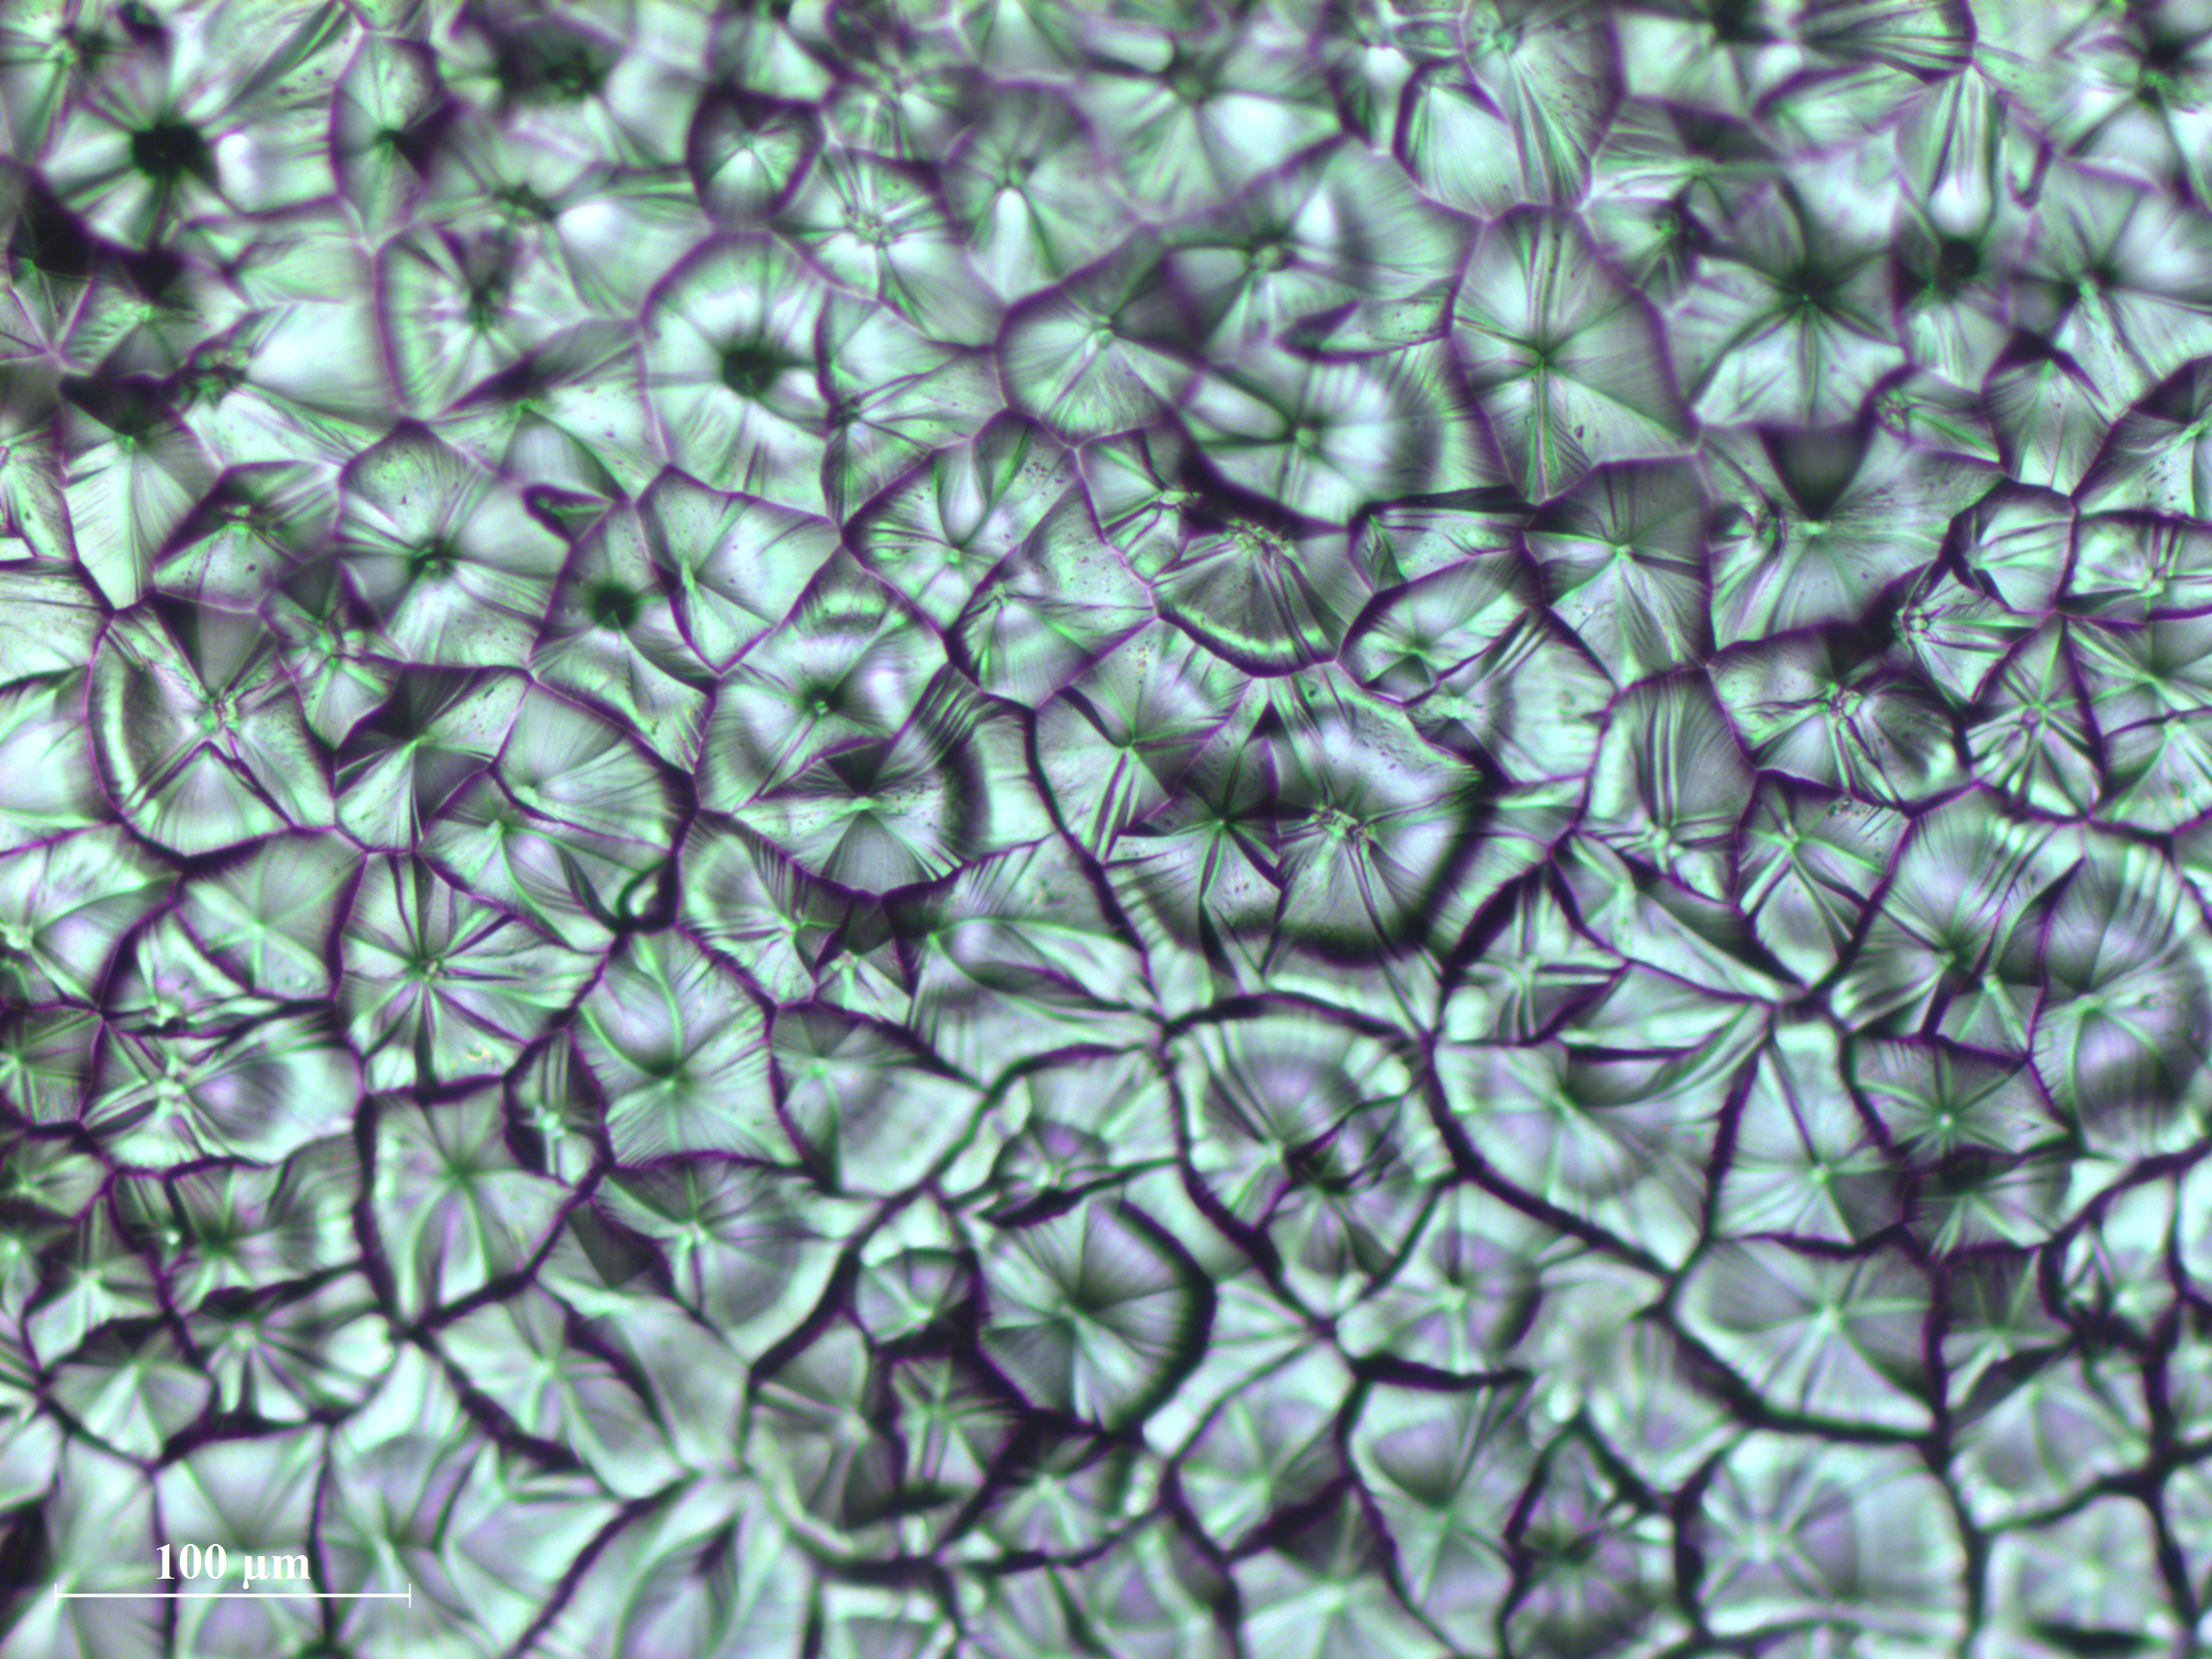 Optical micrograph of perovskite crystal grains crafted by meniscus-assisted solution printing. (Image courtesy of Ming He, Georgia Tech)